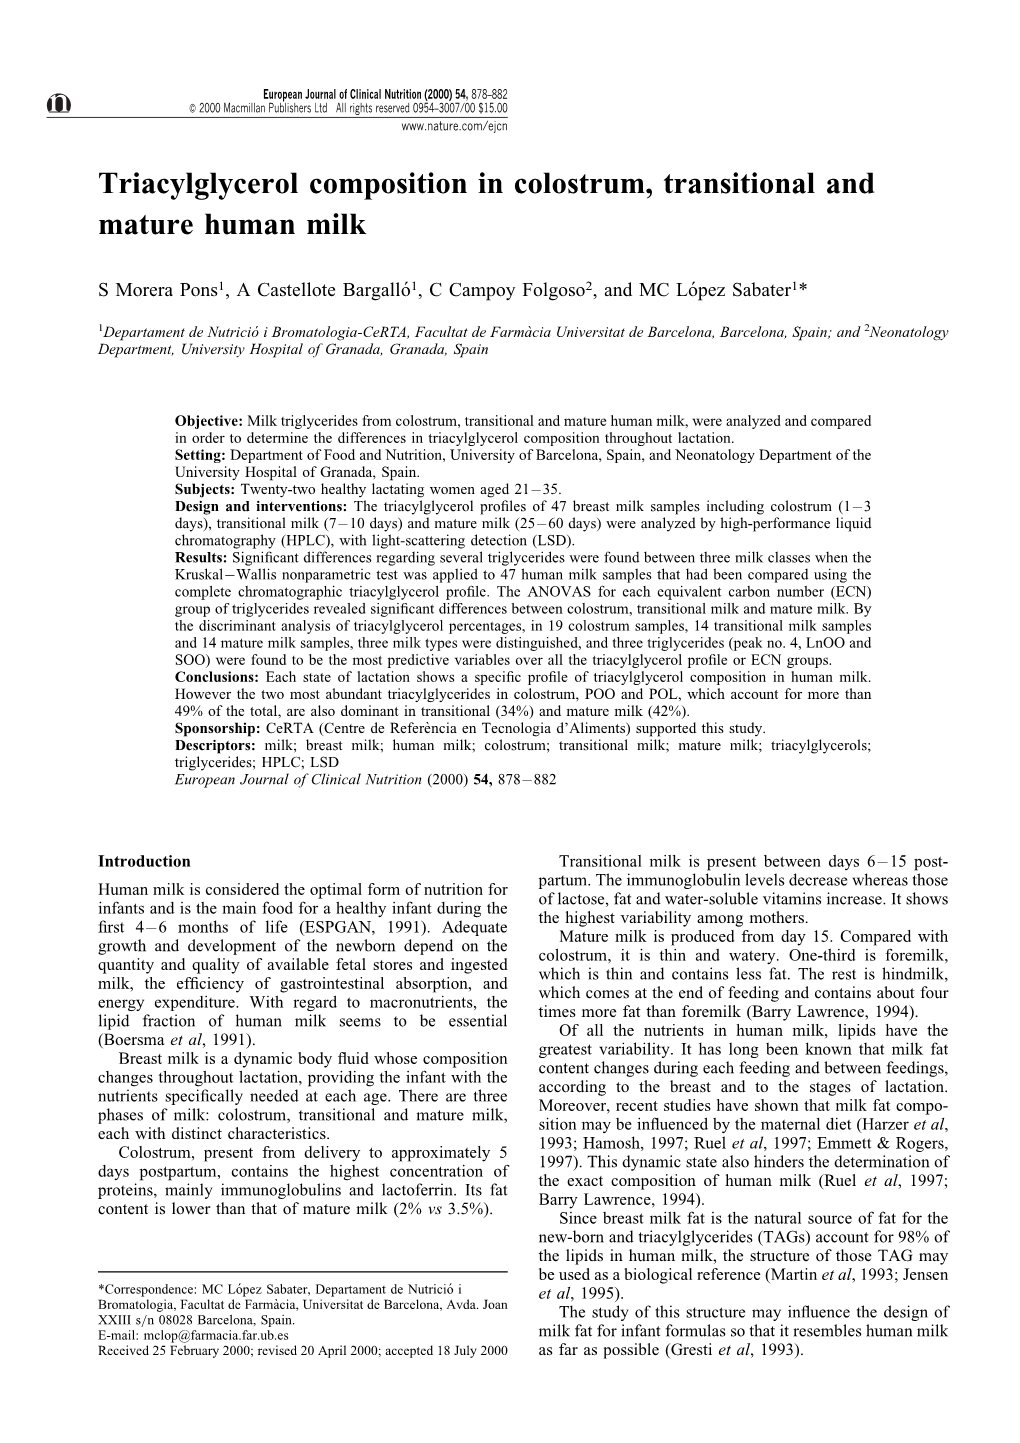 Triacylglycerol Composition in Colostrum, Transitional and Mature Human Milk